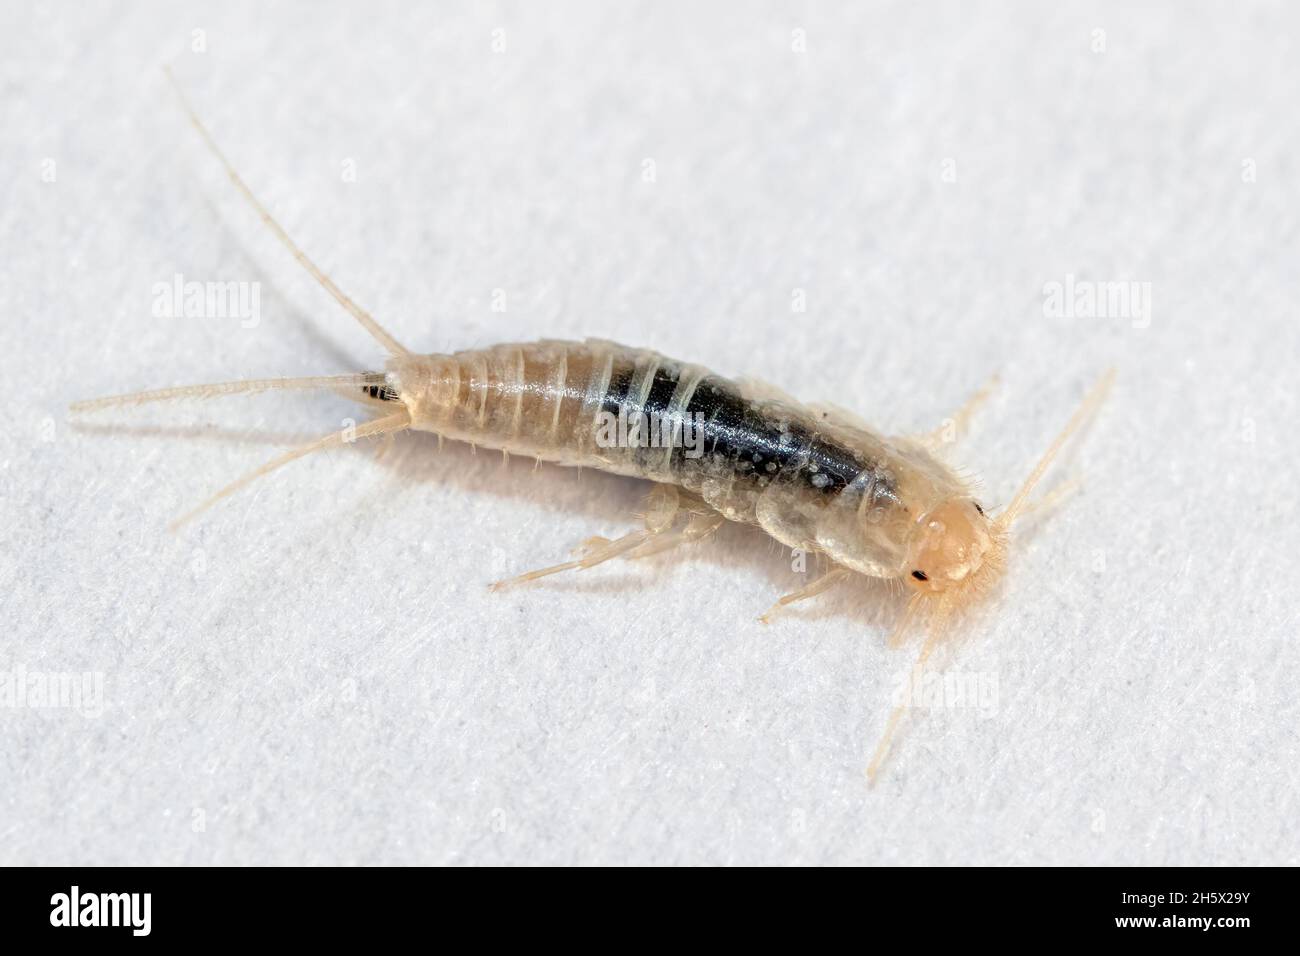 Silverfish in extreme close-up macro on white paper Stock Photo